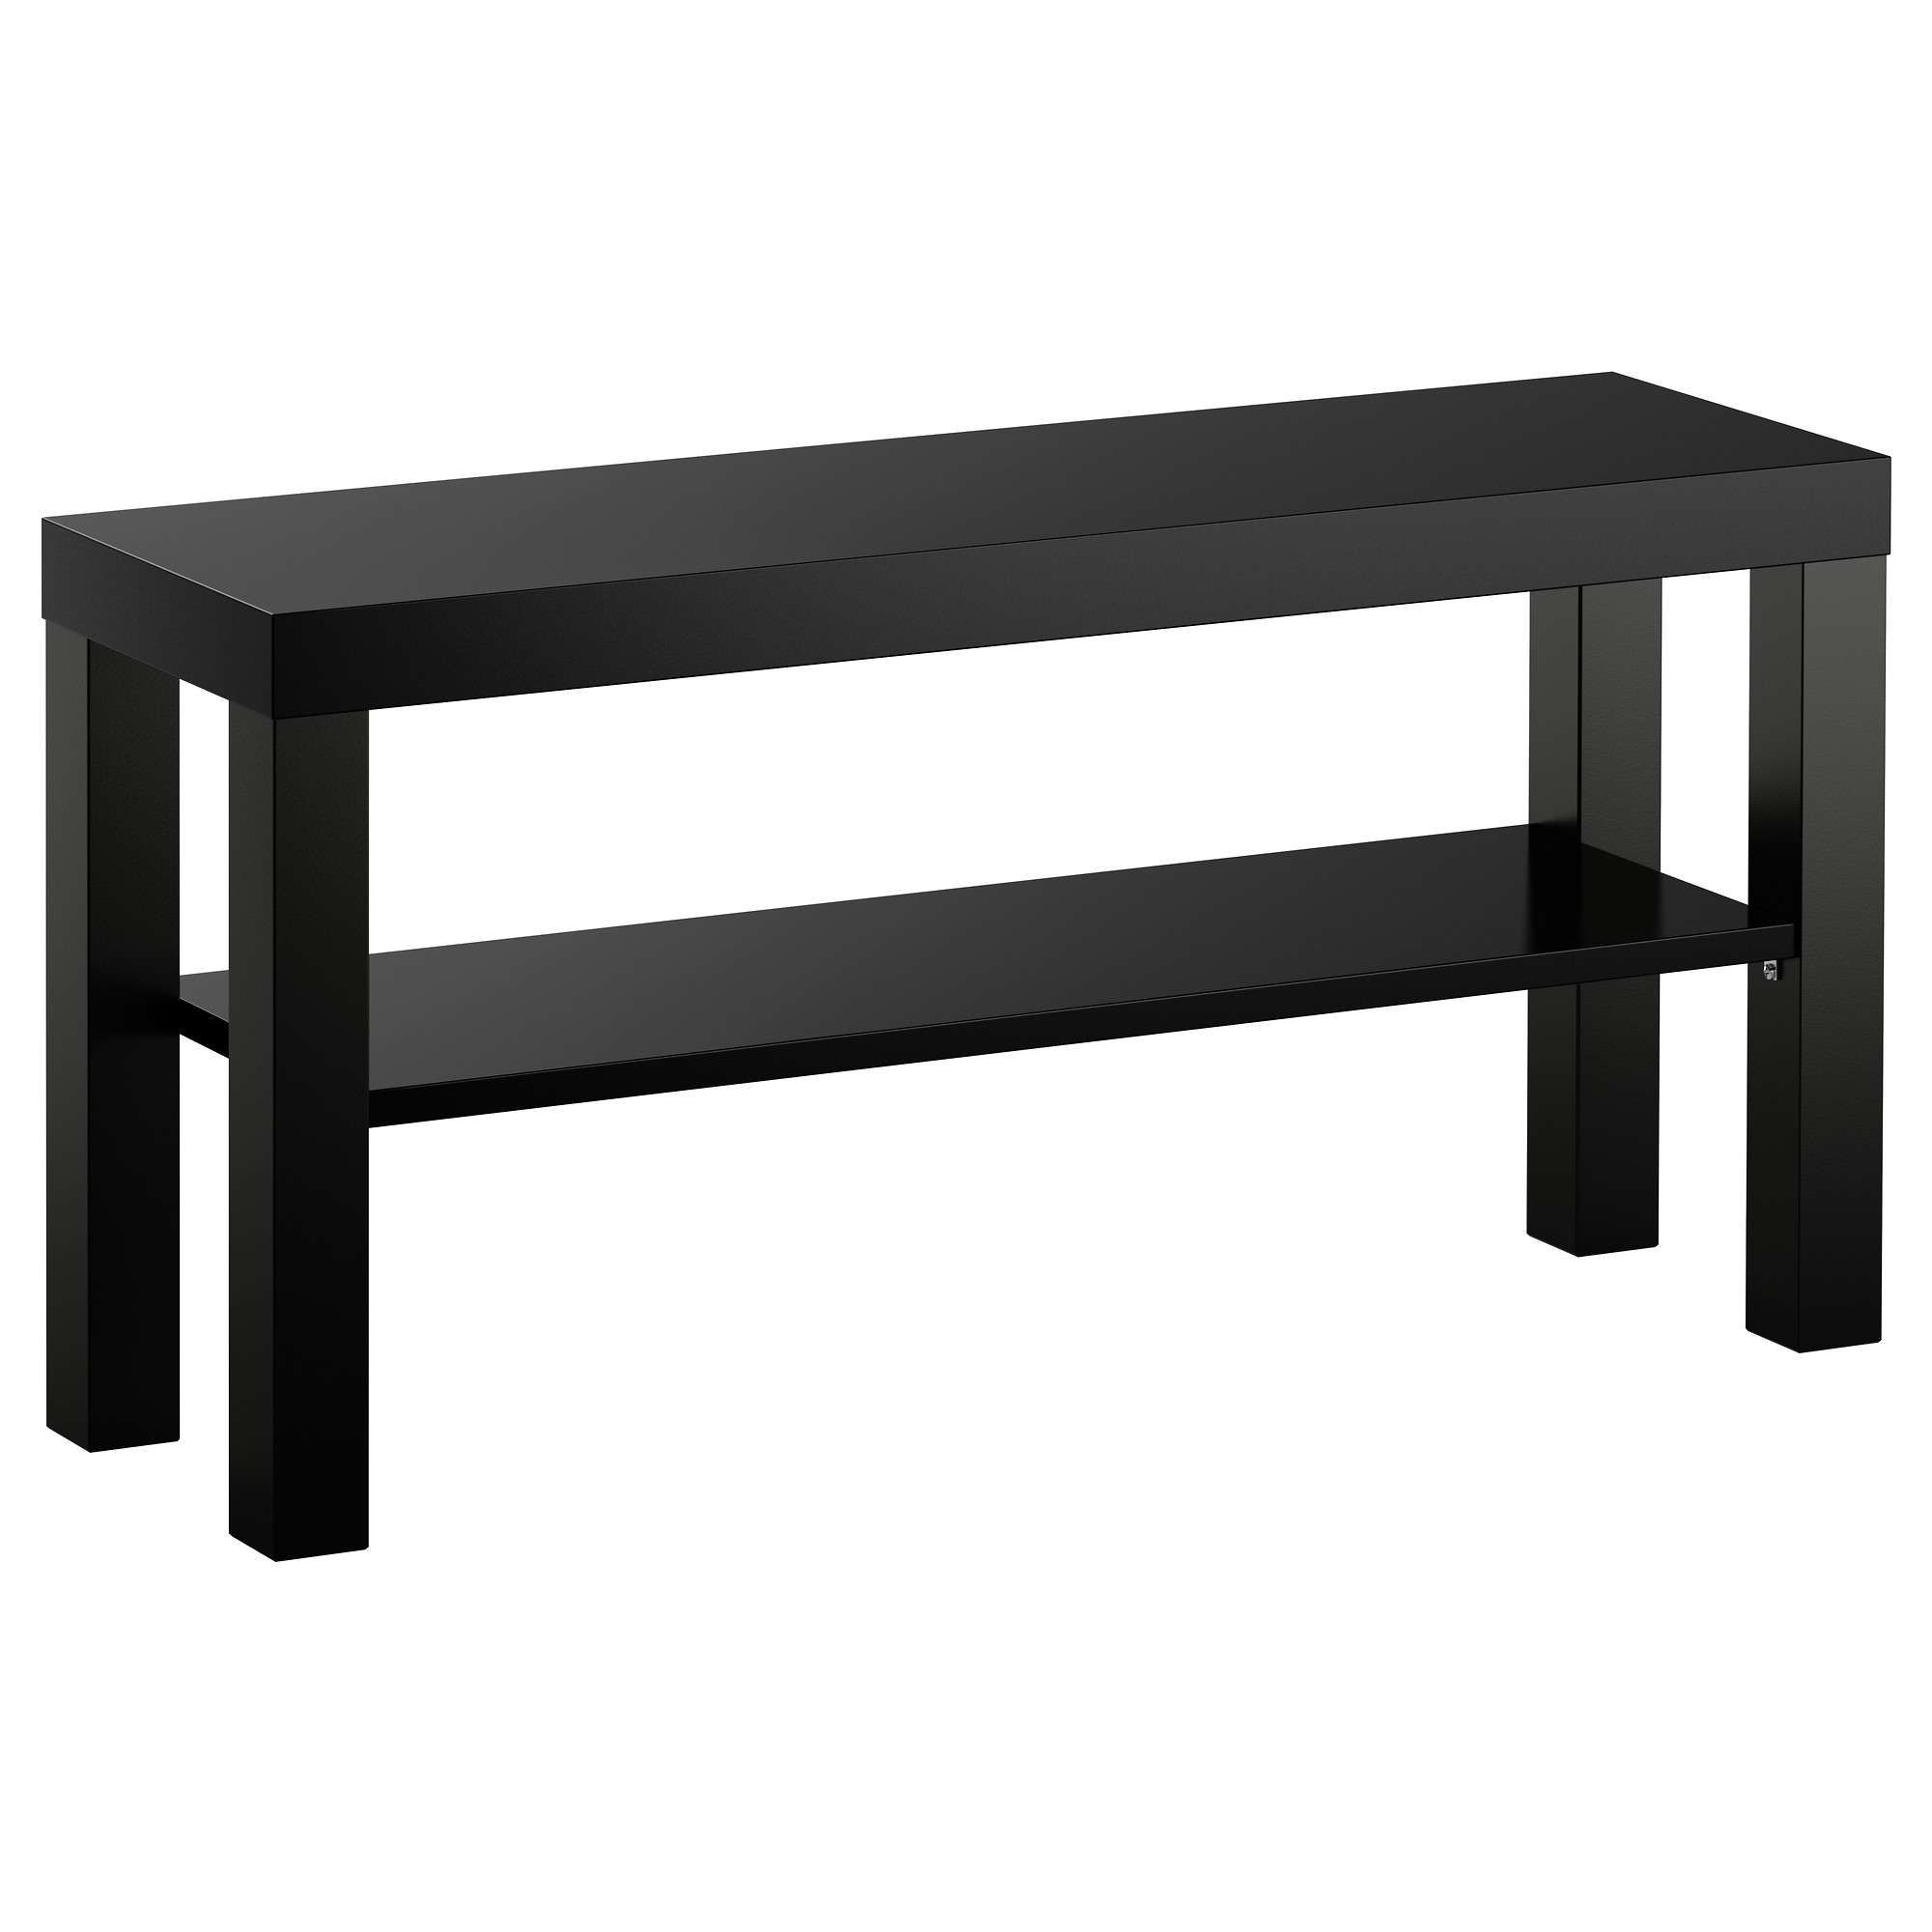 Black Small Tv Stands Tags : 40 Stunning Small Black Tv Stand Inside Small Black Tv Cabinets (View 16 of 20)